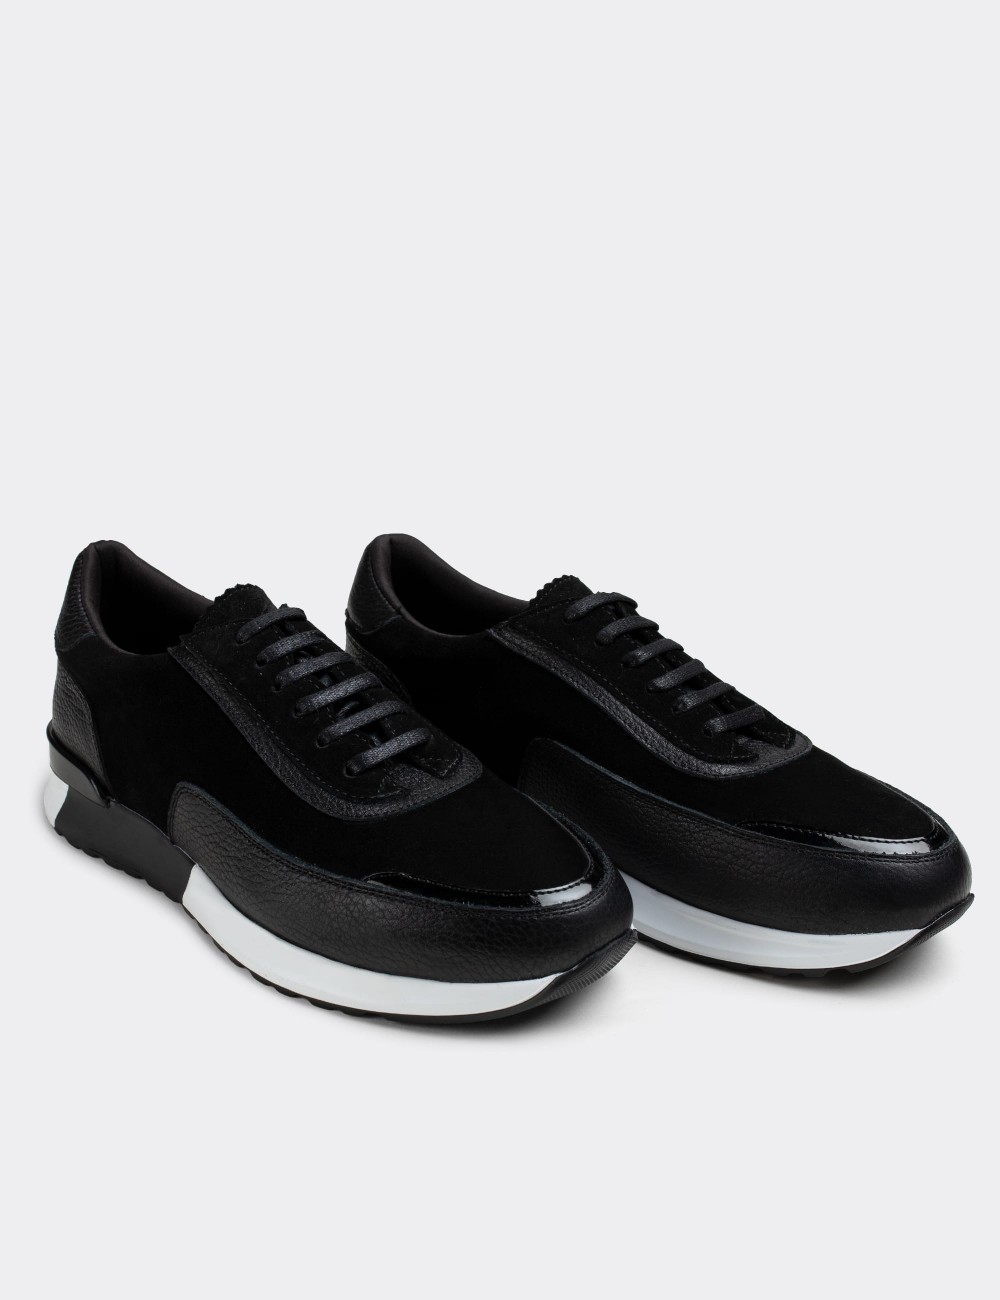 Black Suede Leather Sneakers - 01819MSYHE02